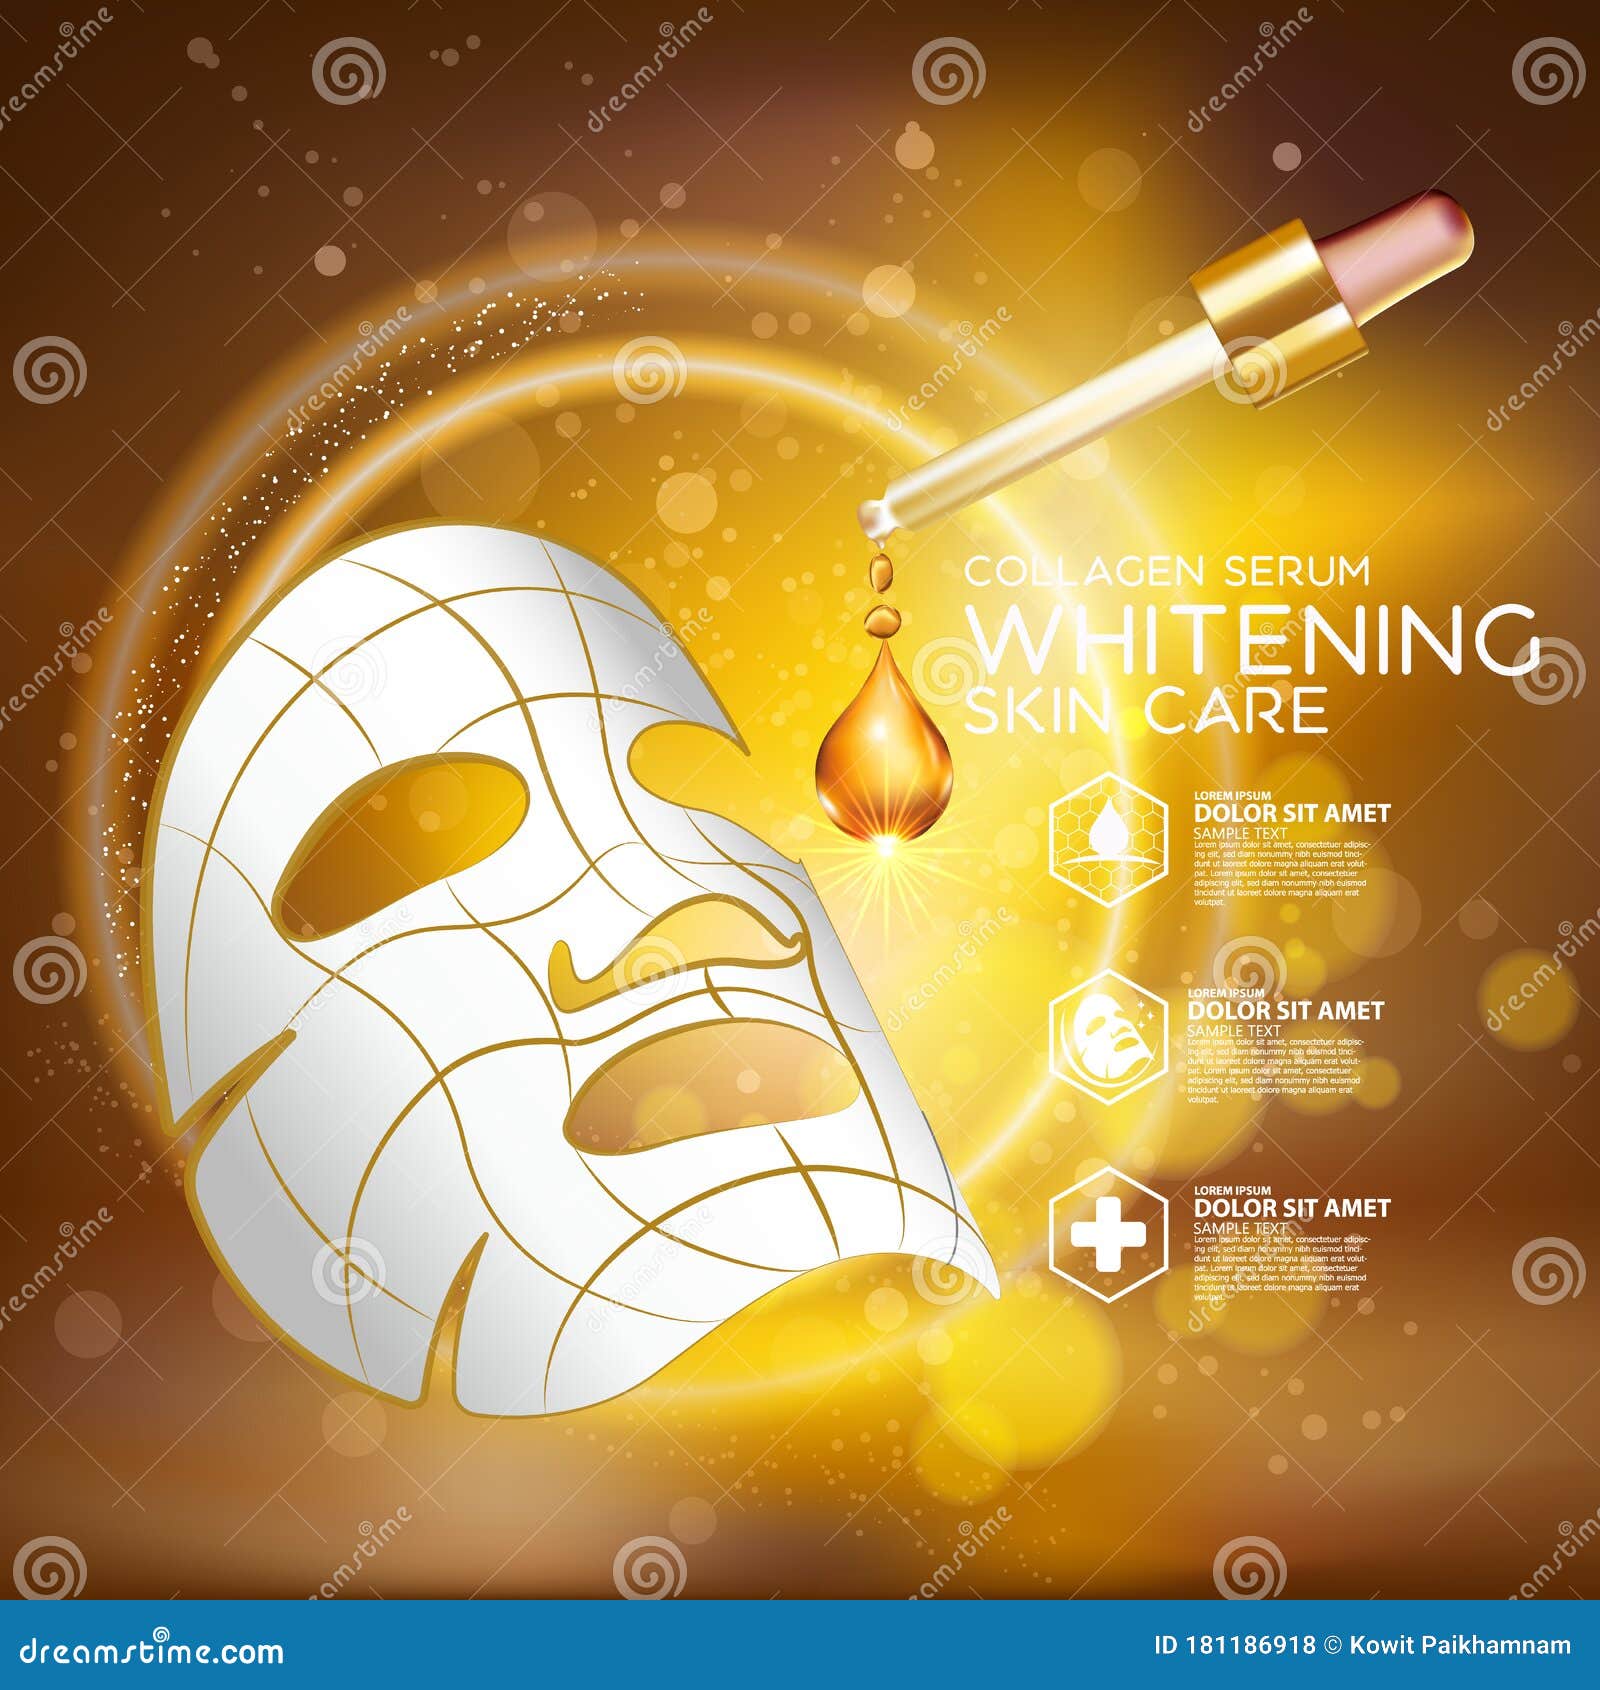 Collagen Serum Skin Care Cosmetic Stock Vector Illustration Of Clear Packaging